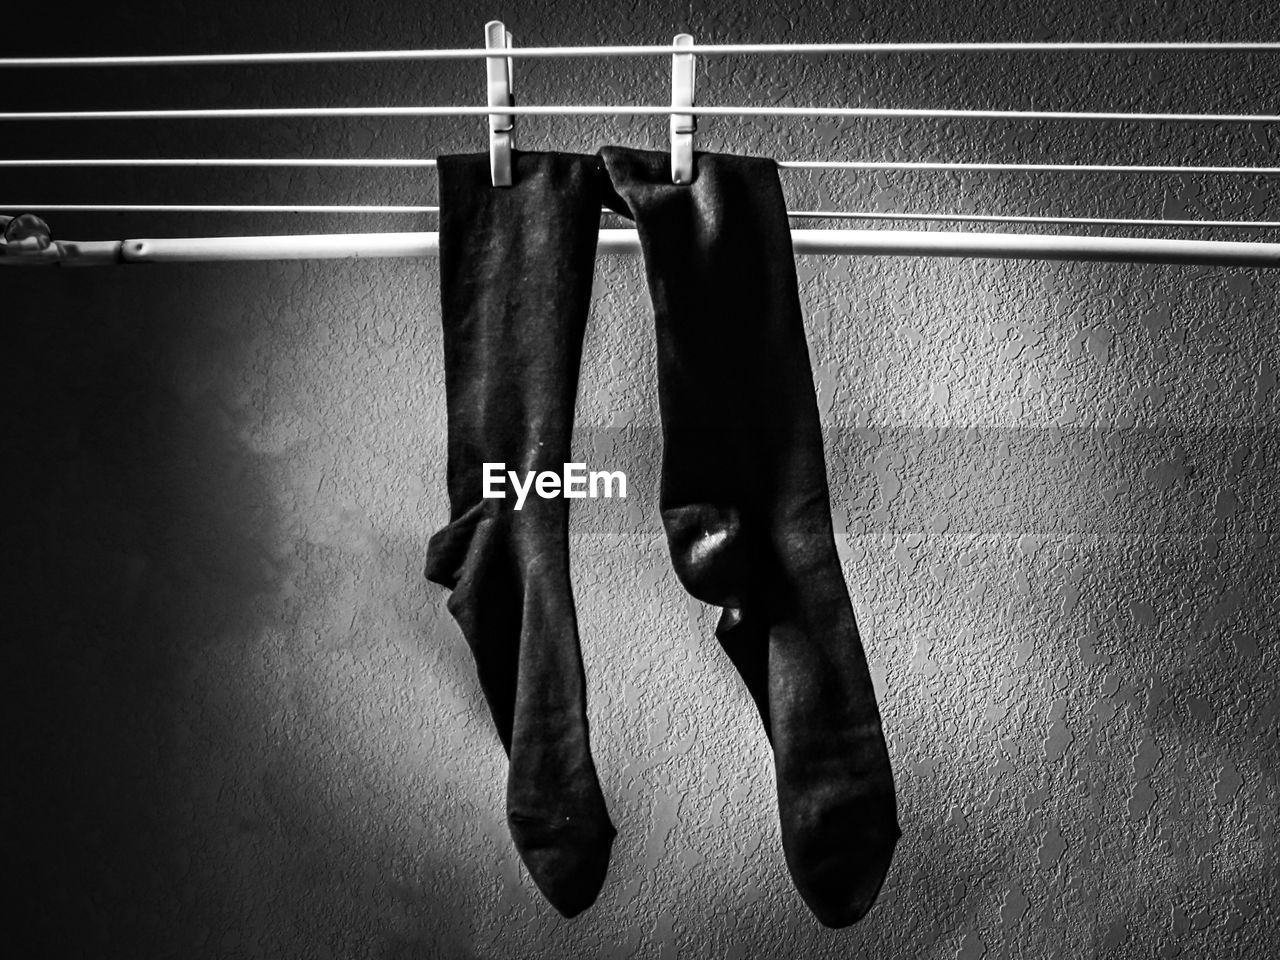 Socks drying on clothesline against wall